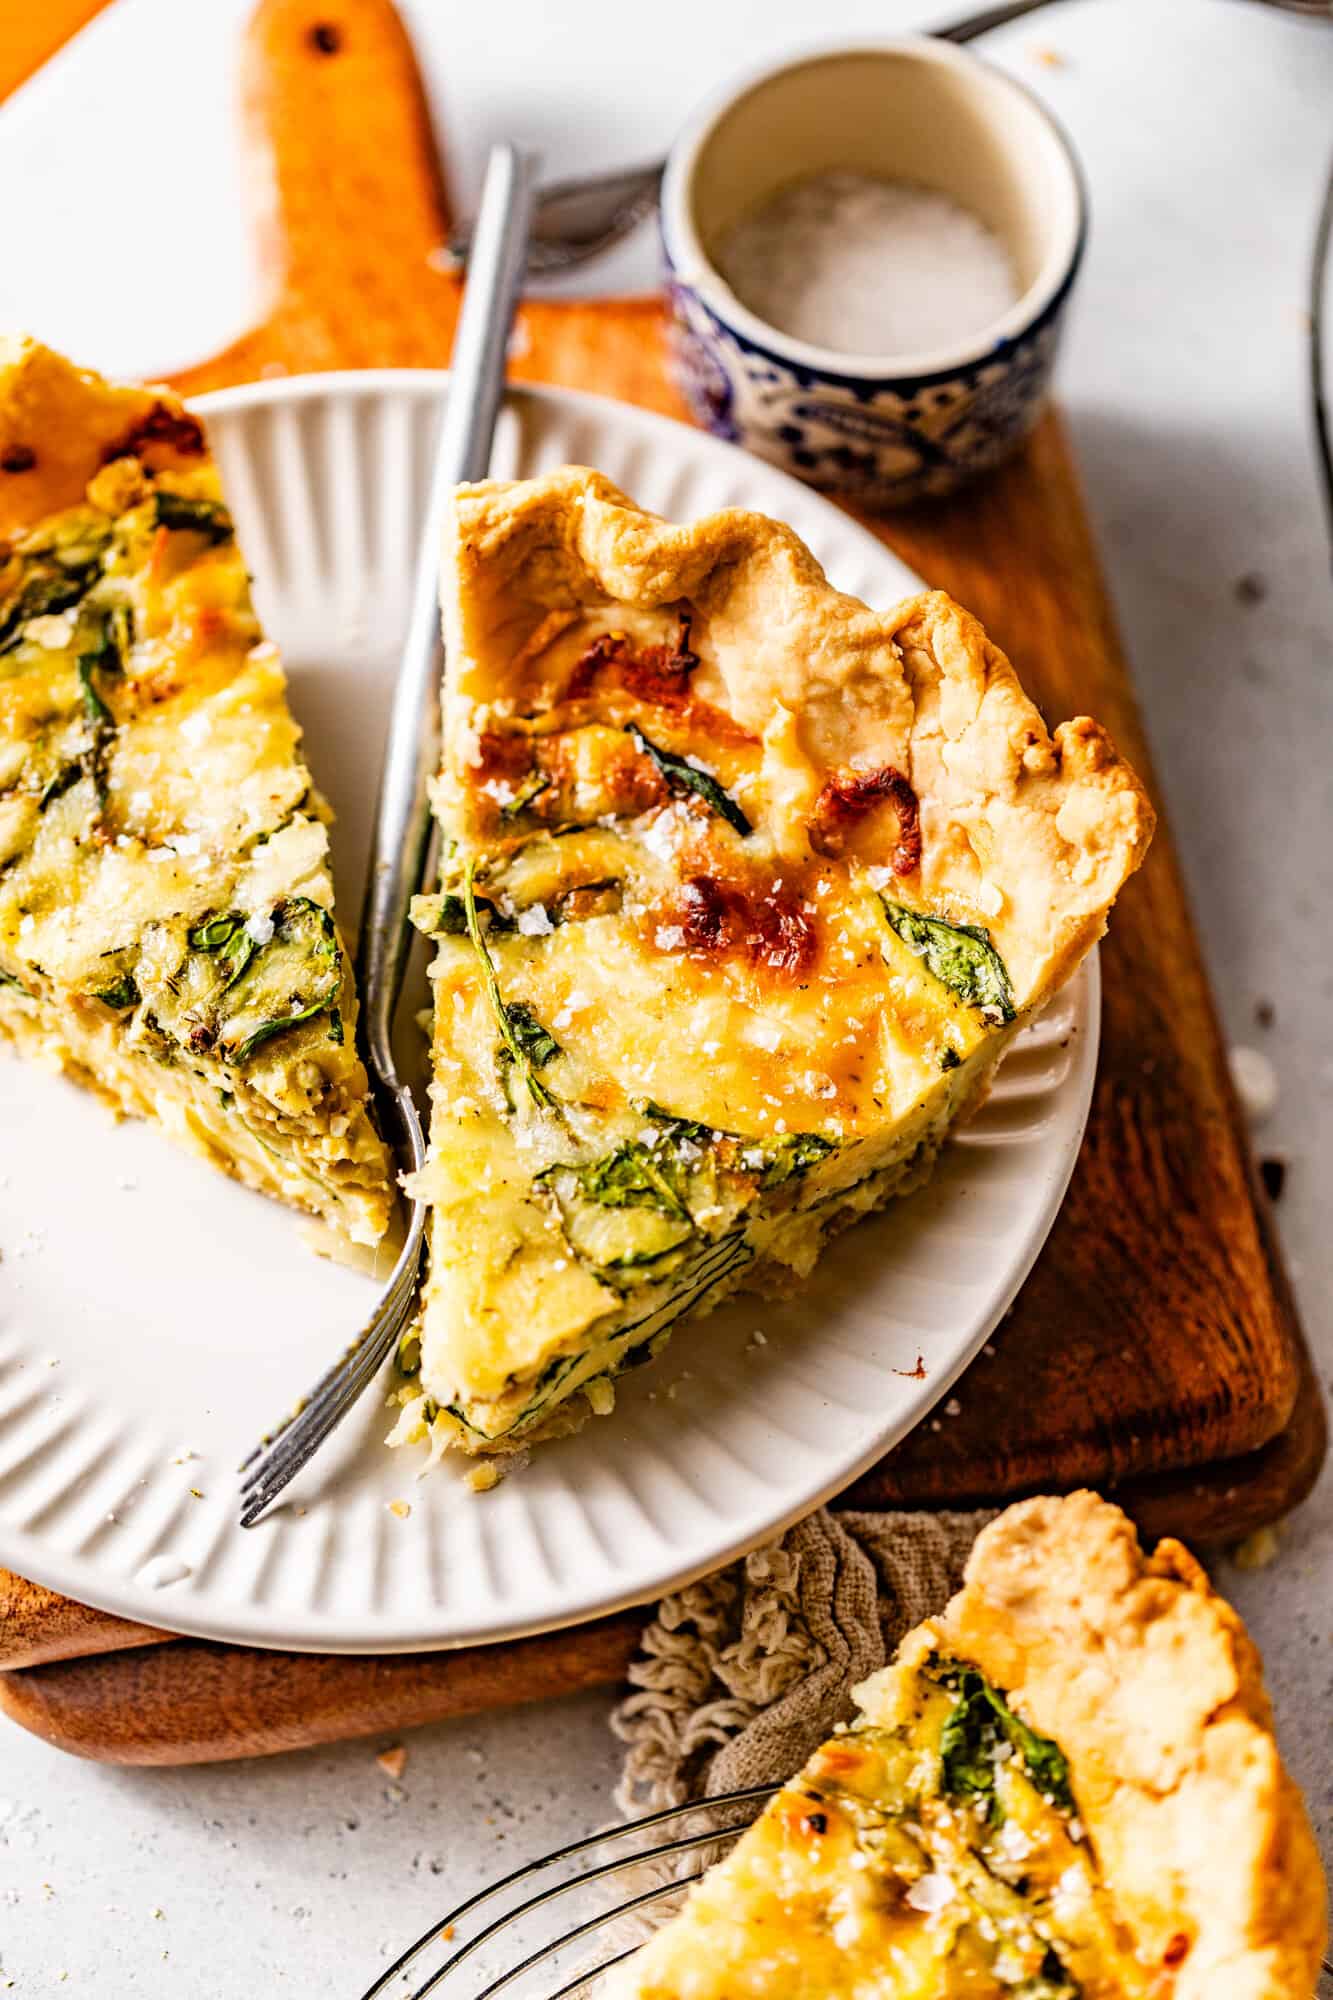 two slices of quiche florentine on a plate with a fork.